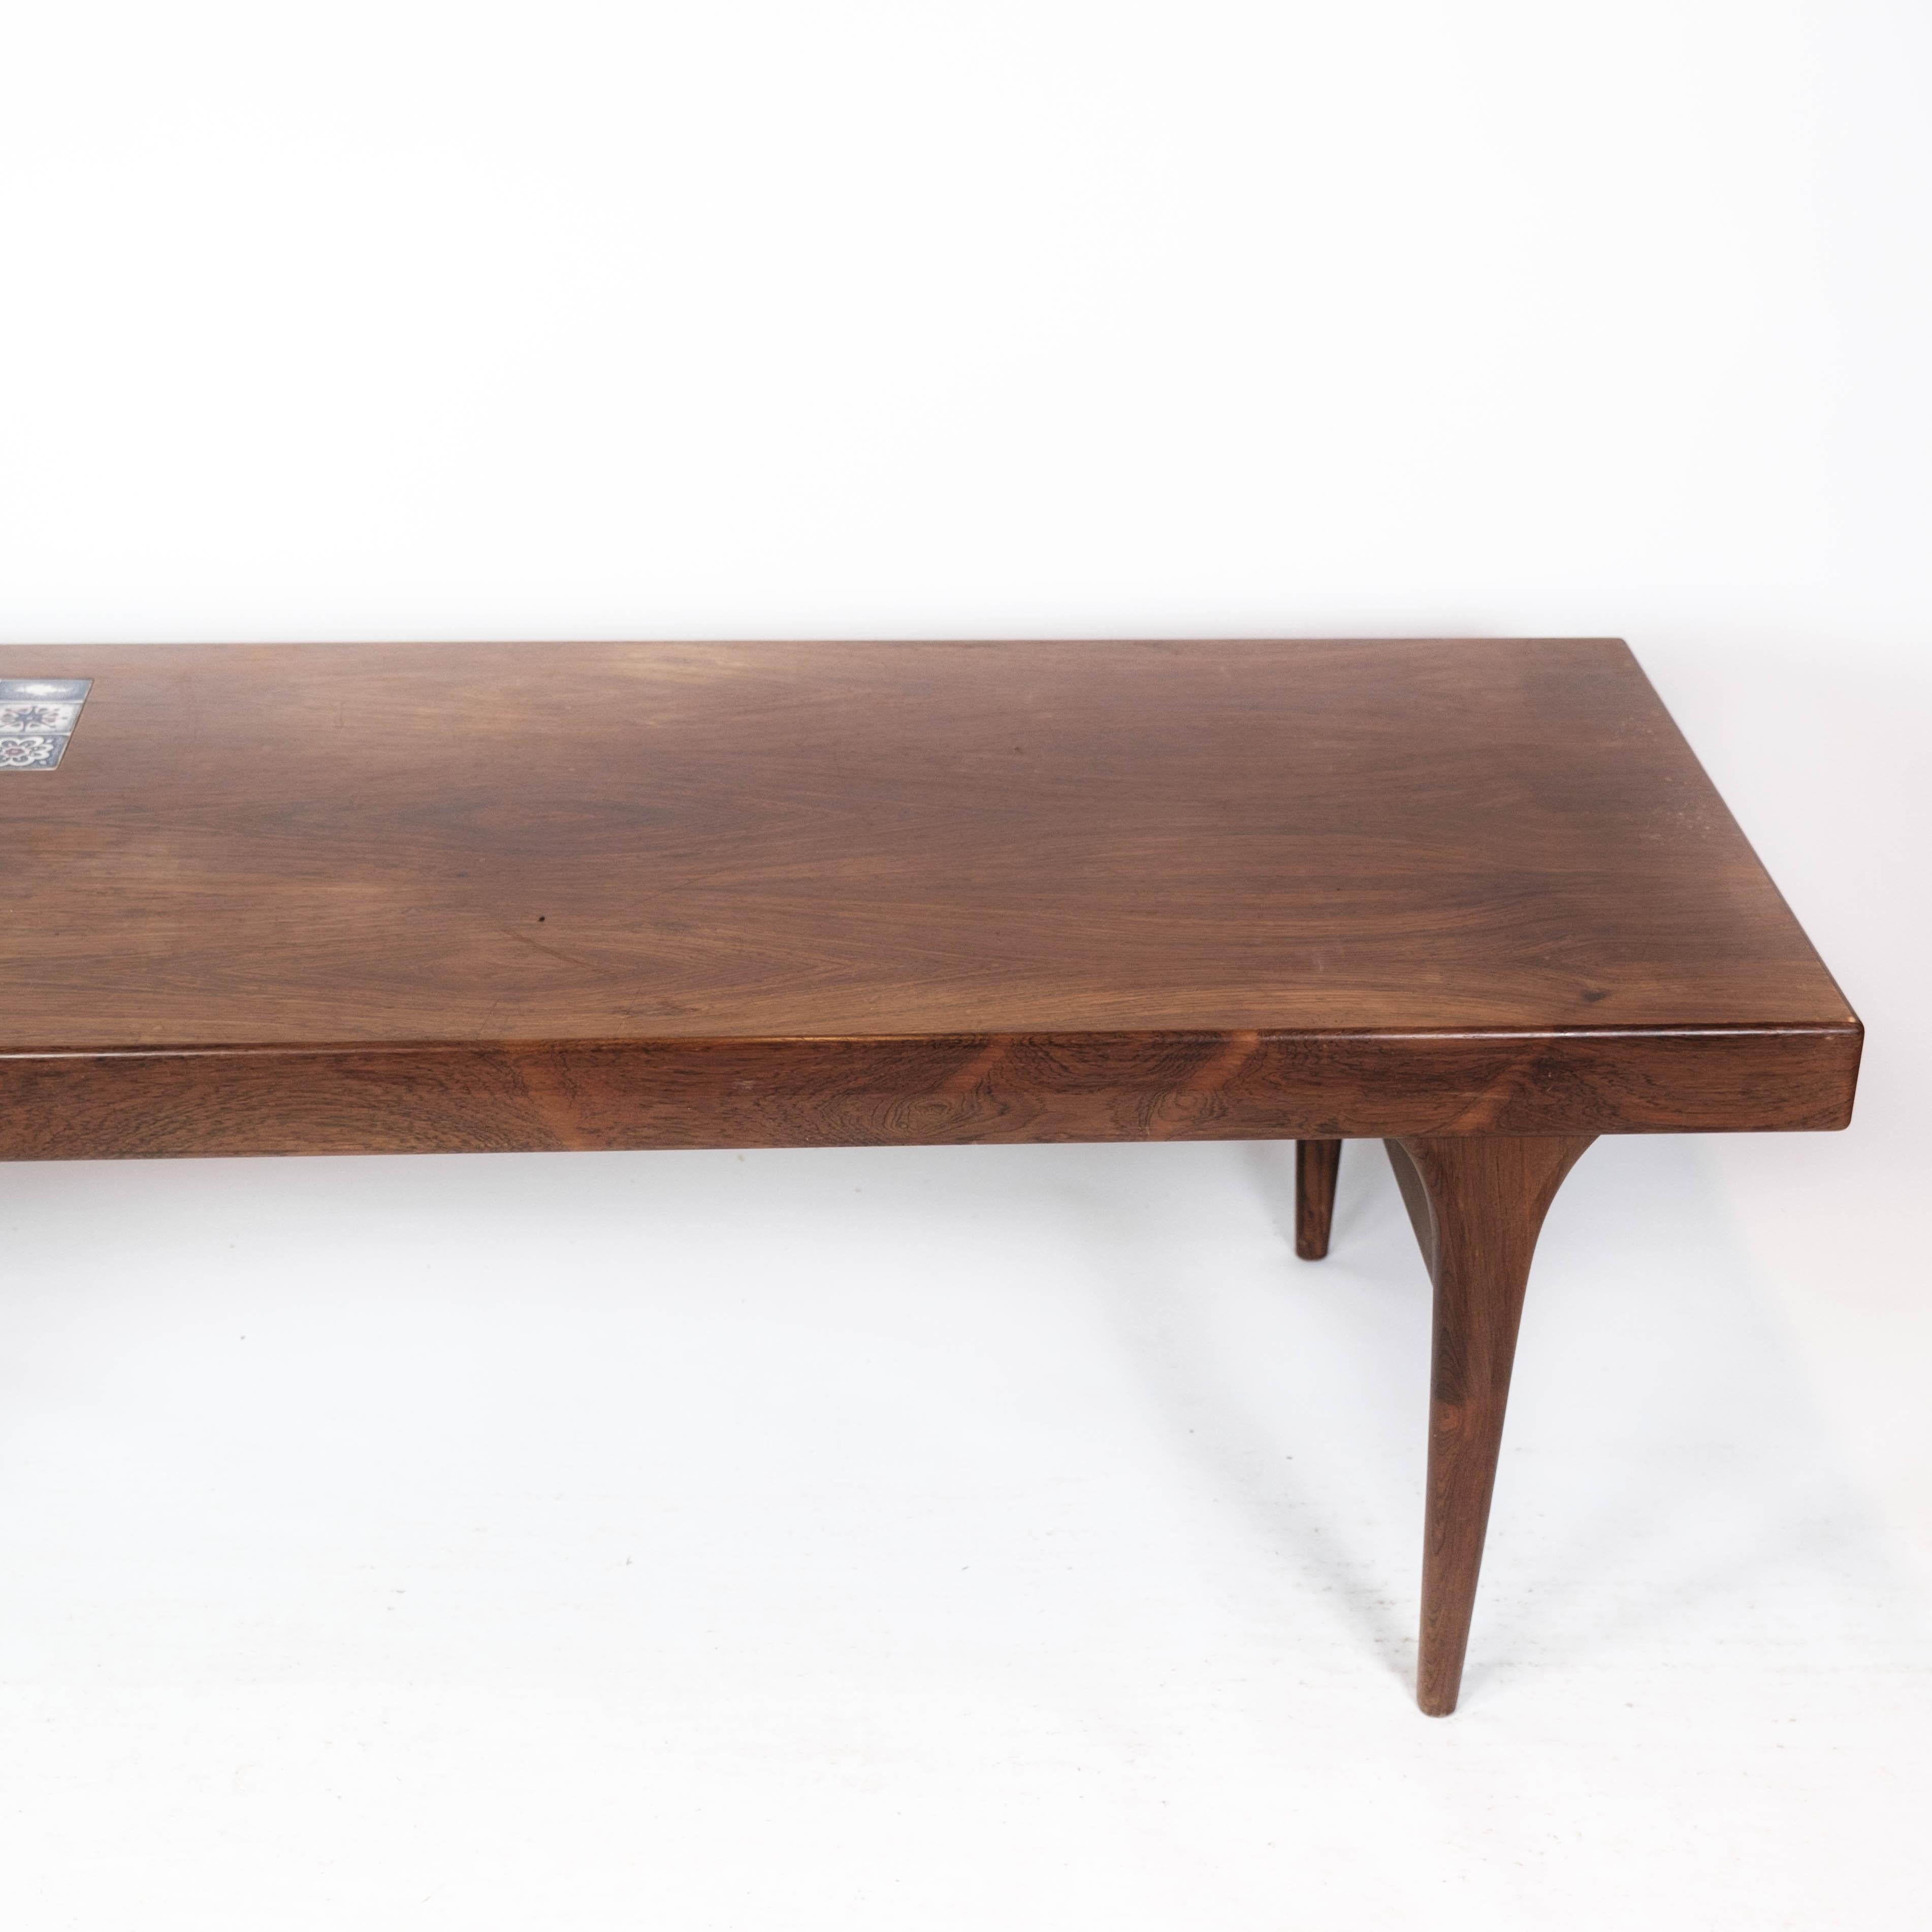 Scandinavian Modern Coffee Table Made In Rosewood With Blue Tiles by Johannes Andersen From 1960s For Sale